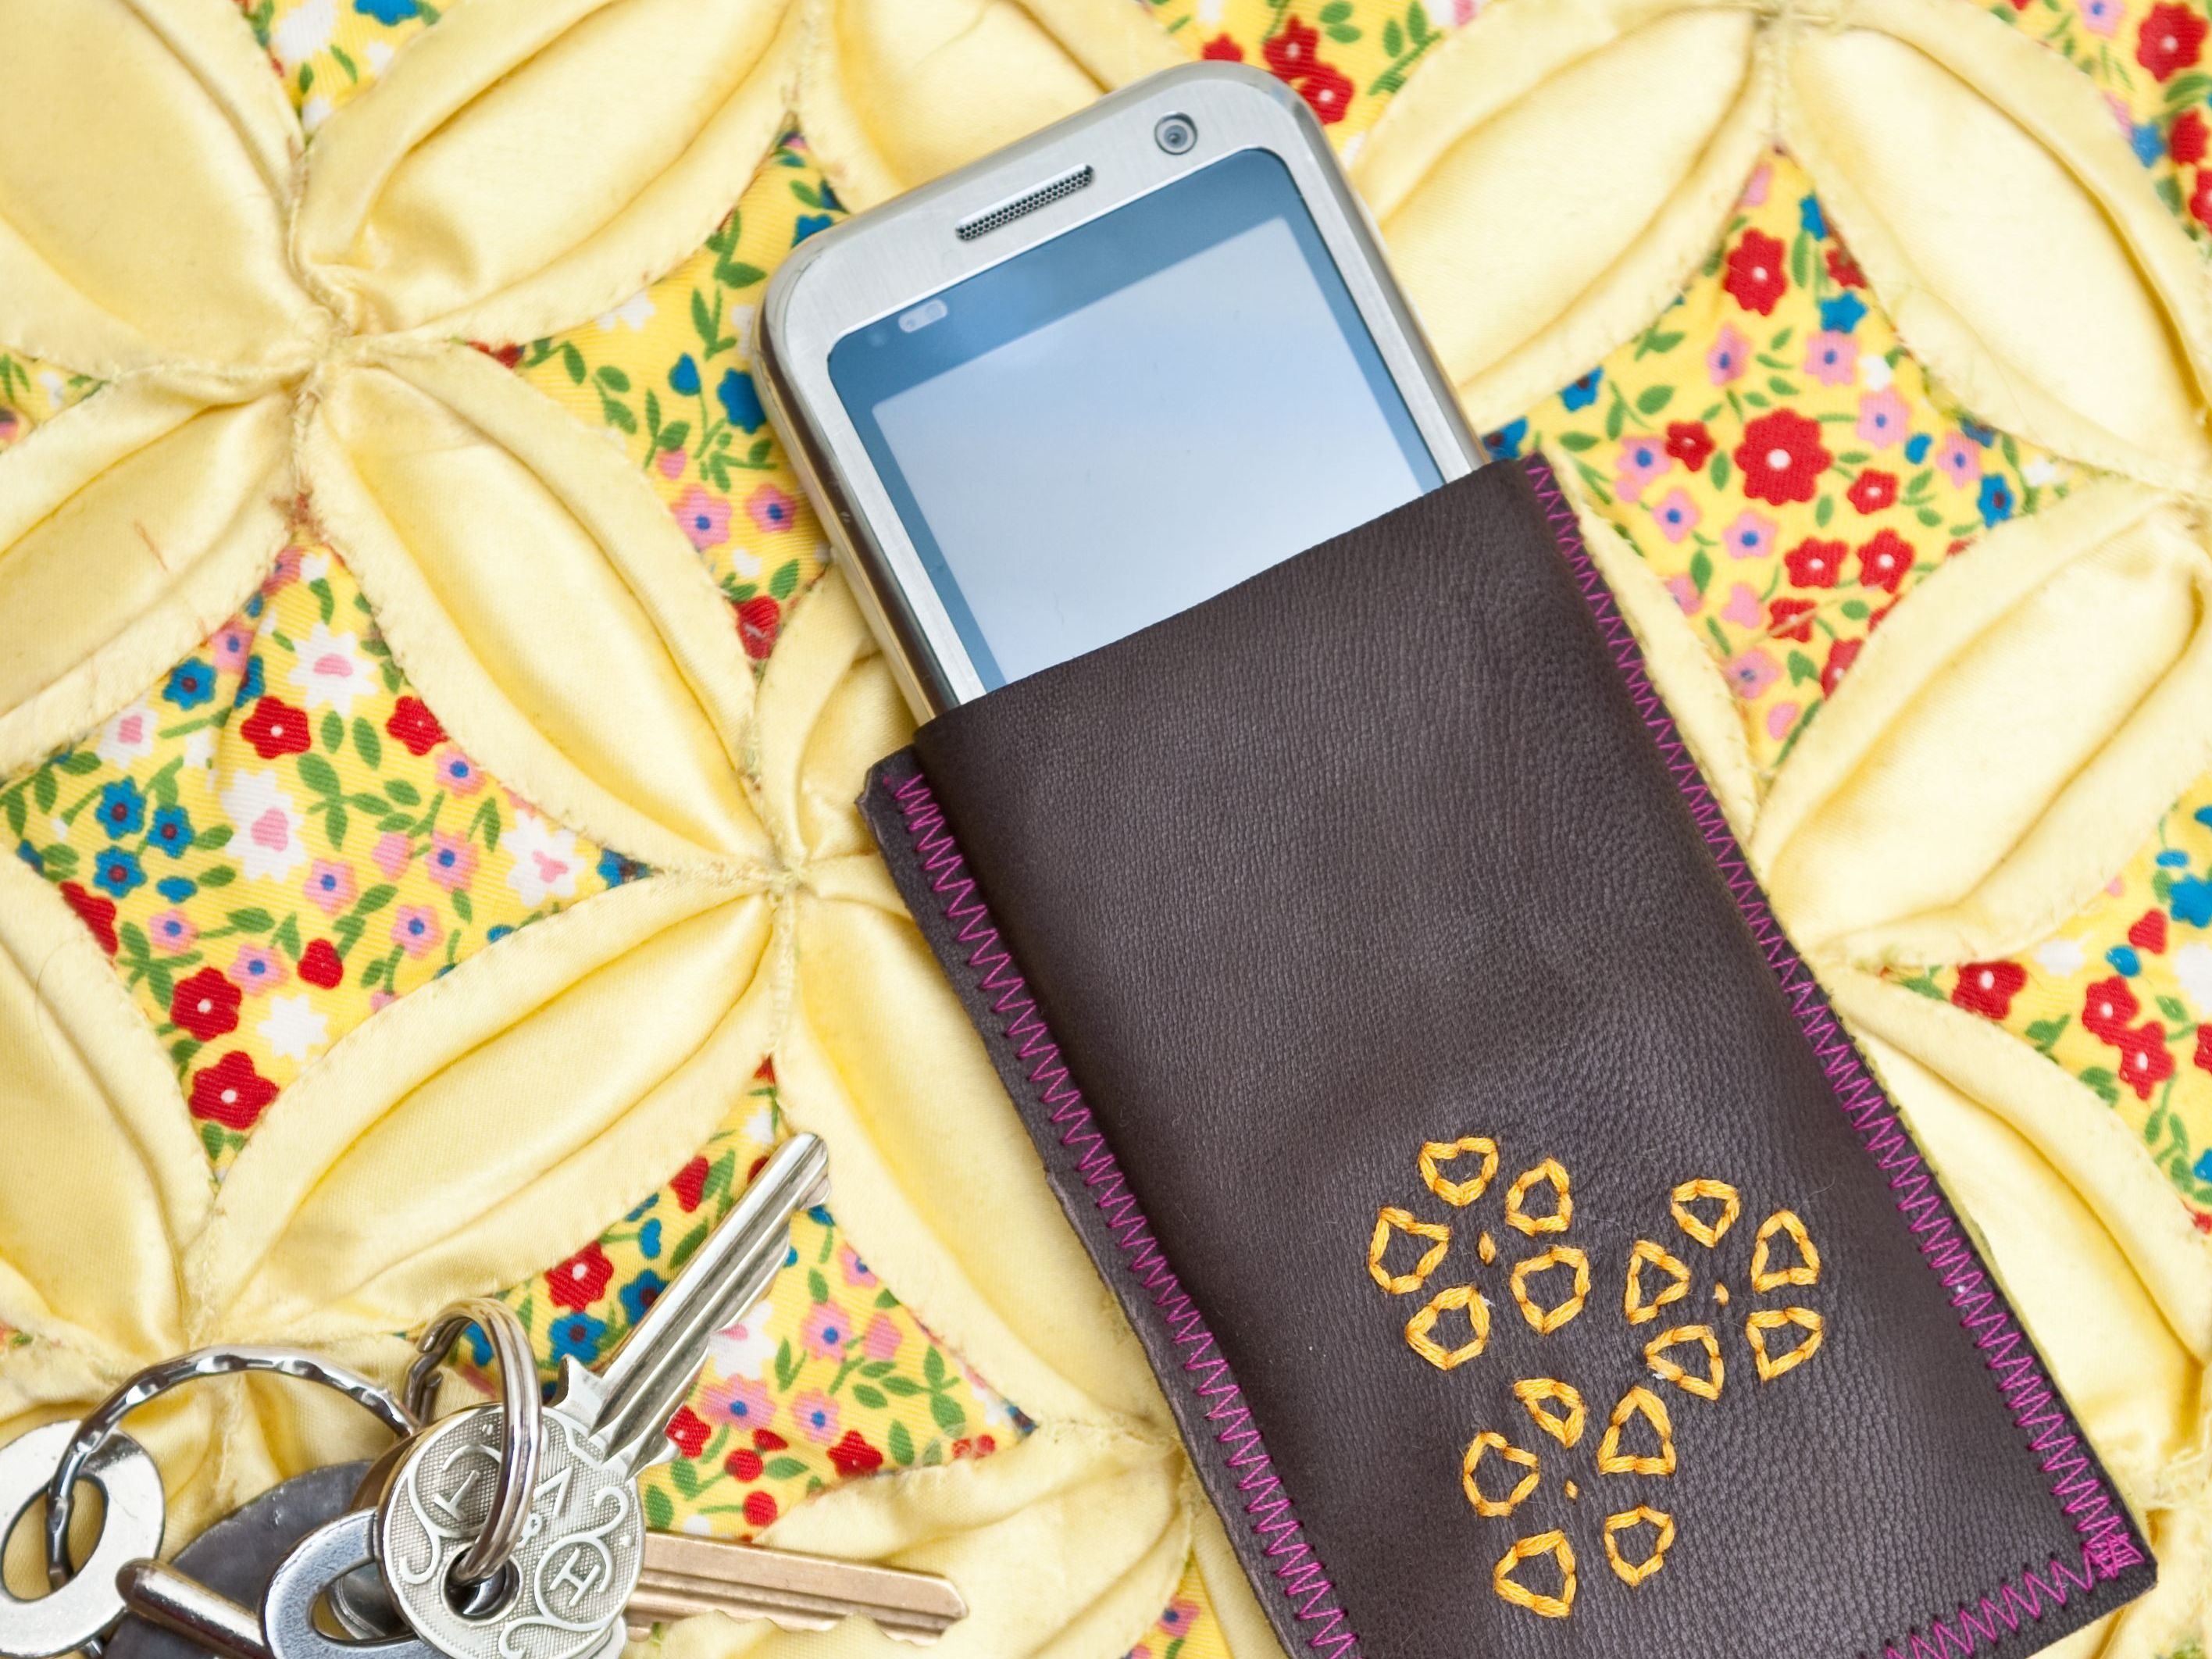 Phone Home Leather Smartphone Case from Busy Girls Guide to Sewing